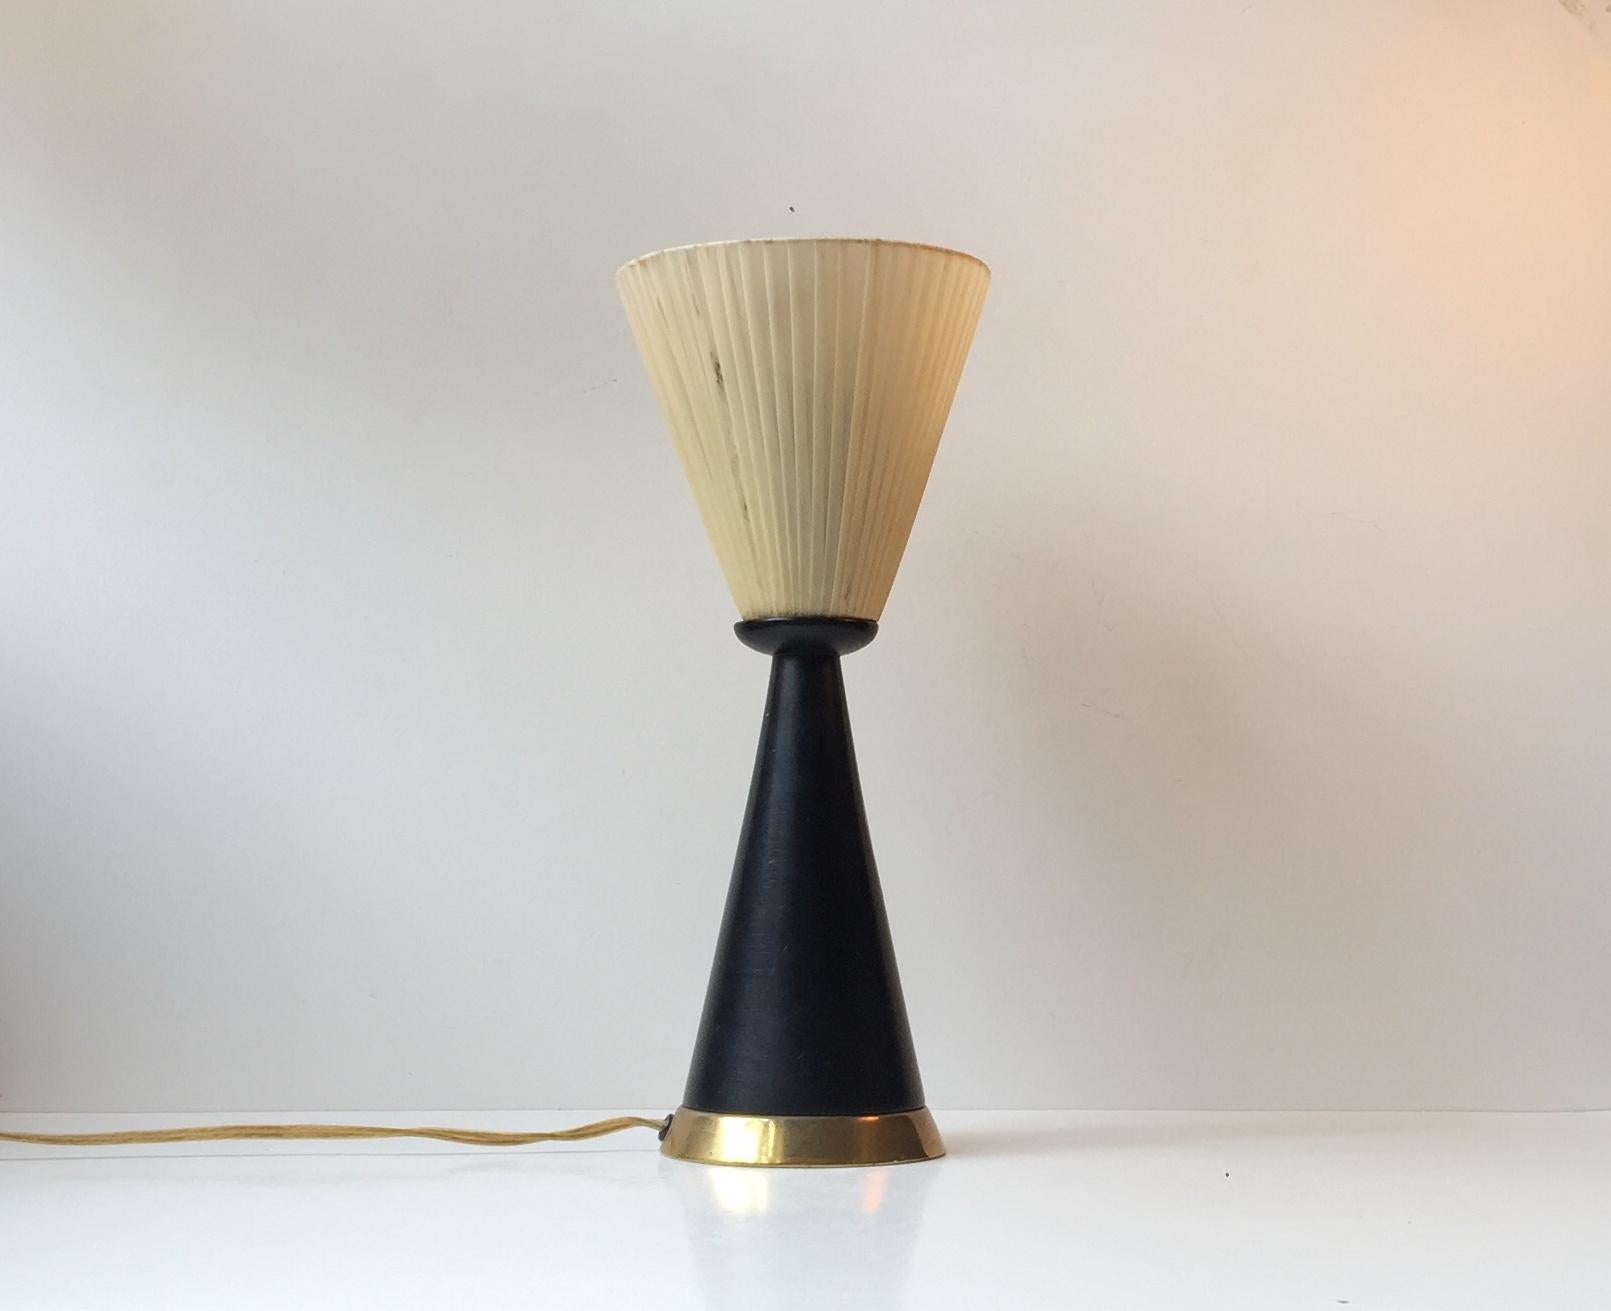 Diablo table light composed of a black lacquered wooden cone, a brass base and an up-side-down fabric wrapped conical shade. It was manufactured in Italy during the 1960s in a style reminiscent of Stilnovo and Svend Aage Holm Sørensen. Please notice